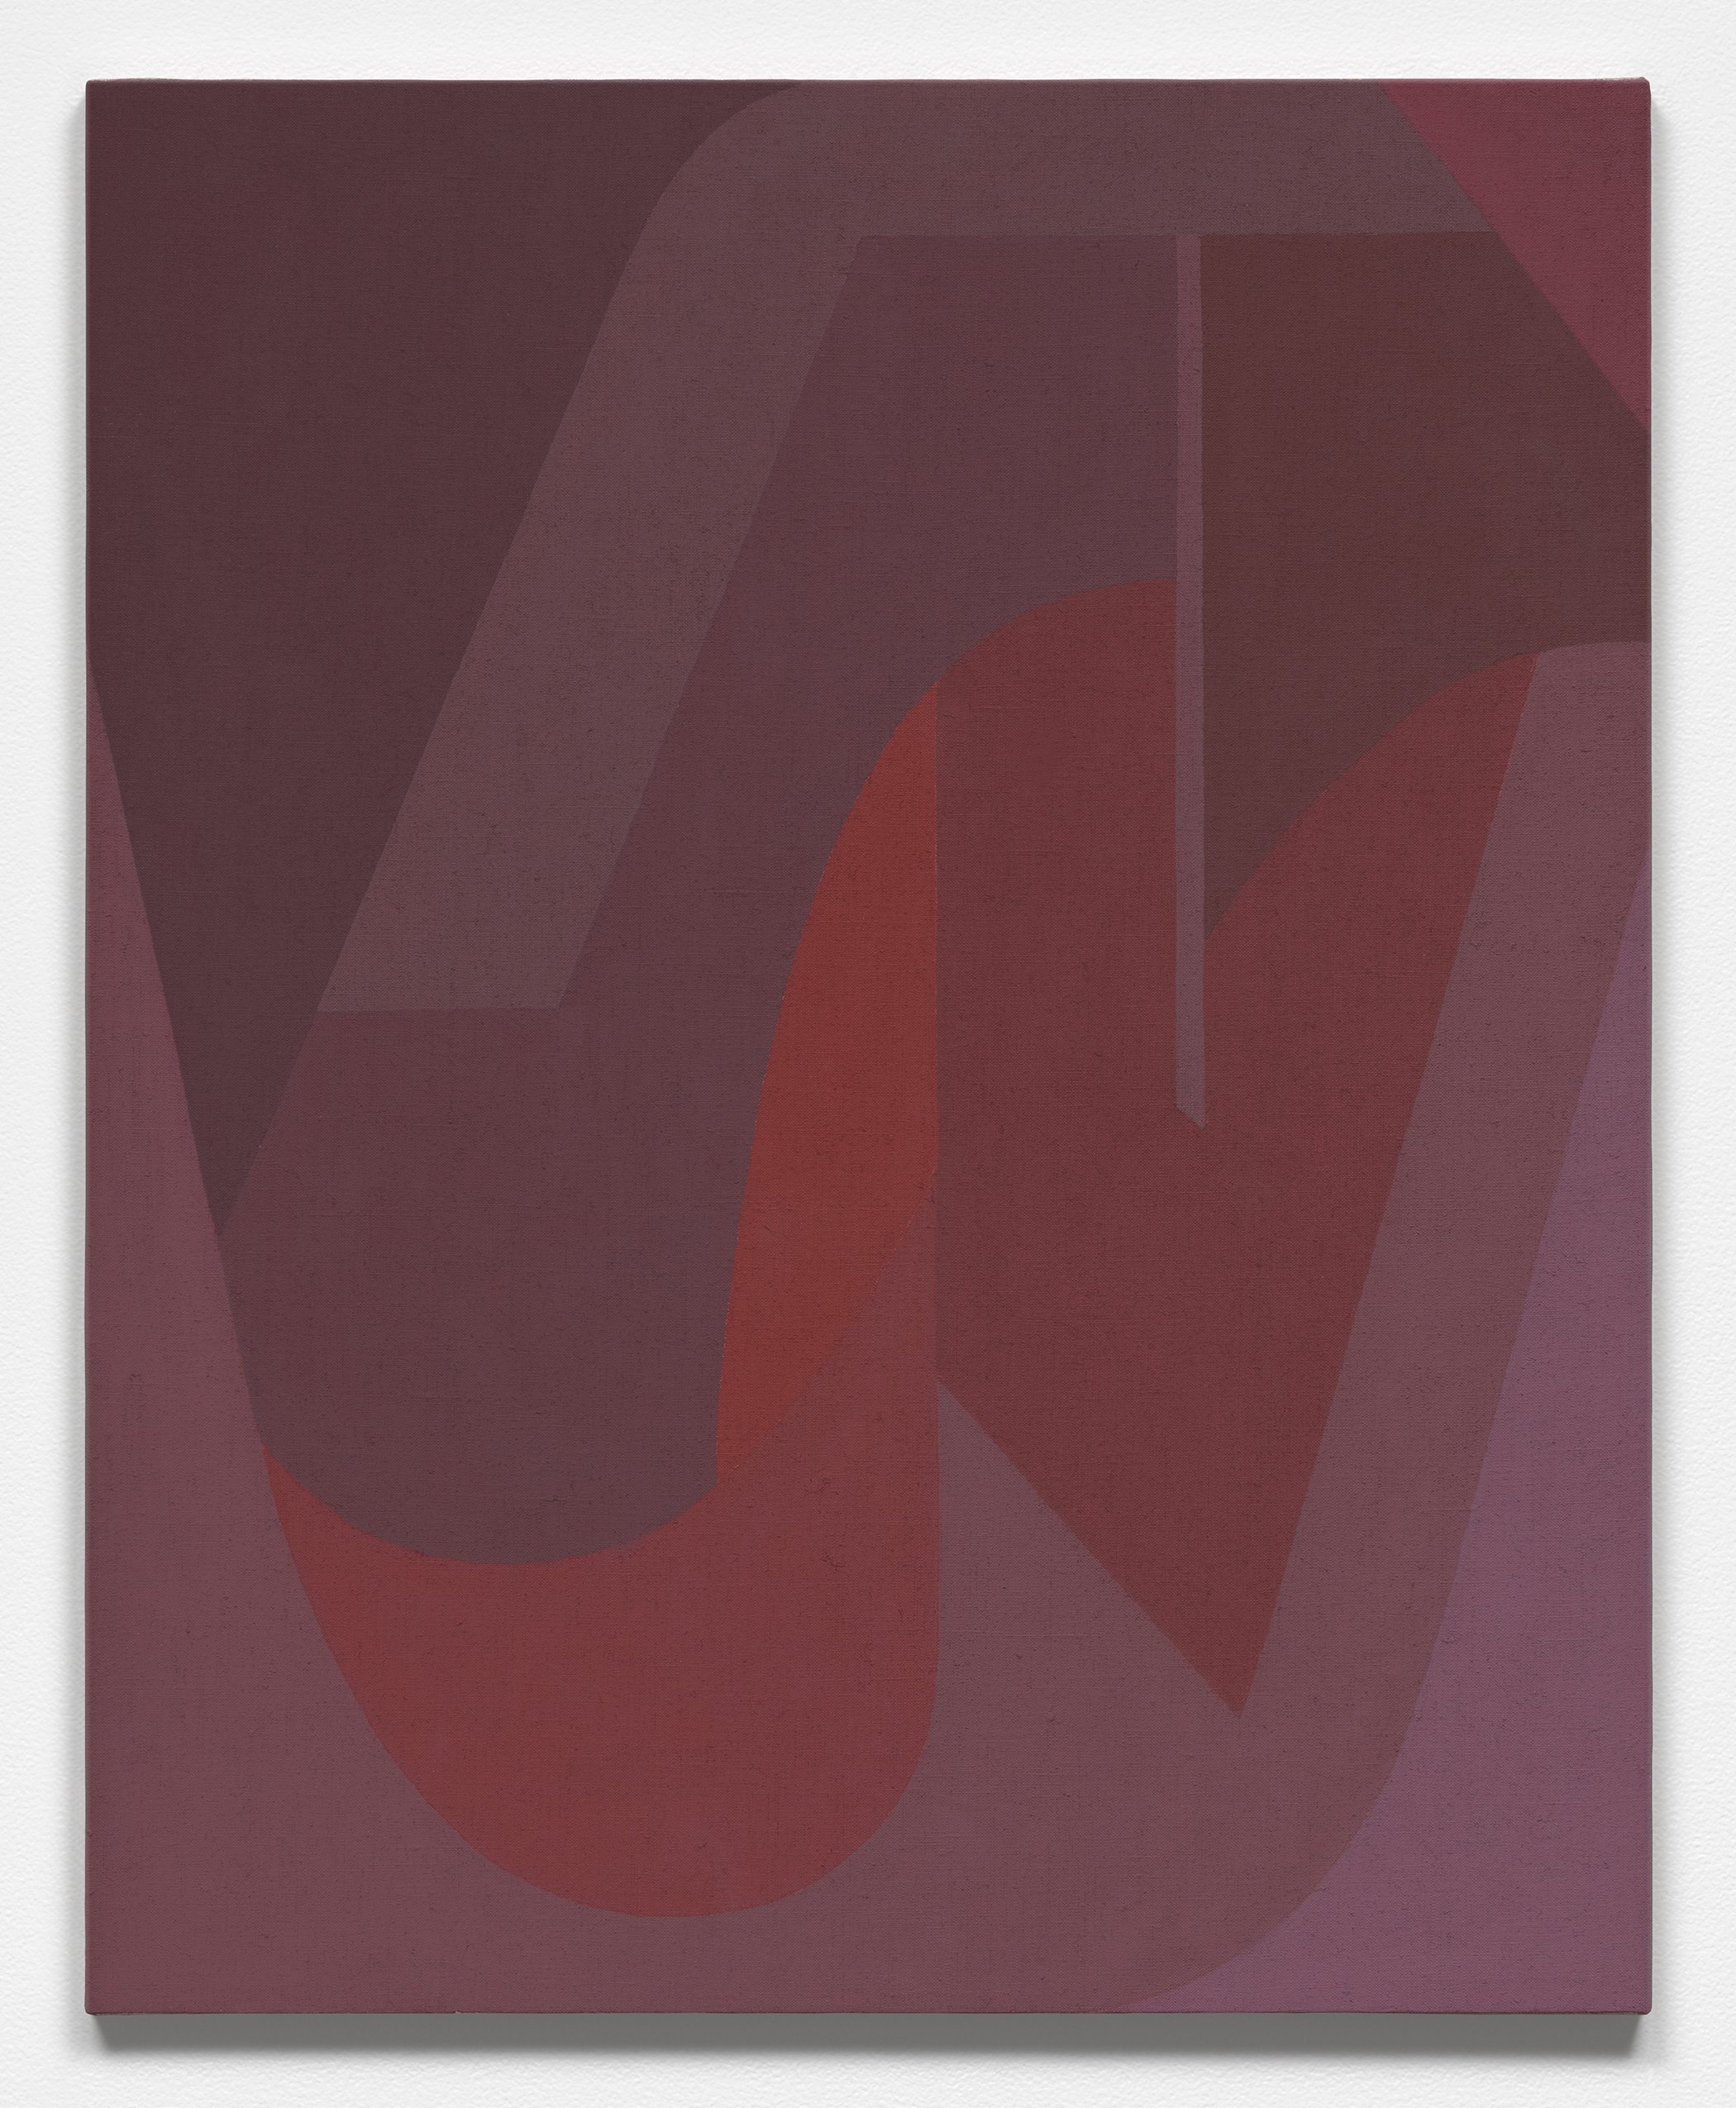  Nancy White    Untitled (1-2020) , 2020 acrylic on linen mounted to panel 16" x 13"   INQUIRE   